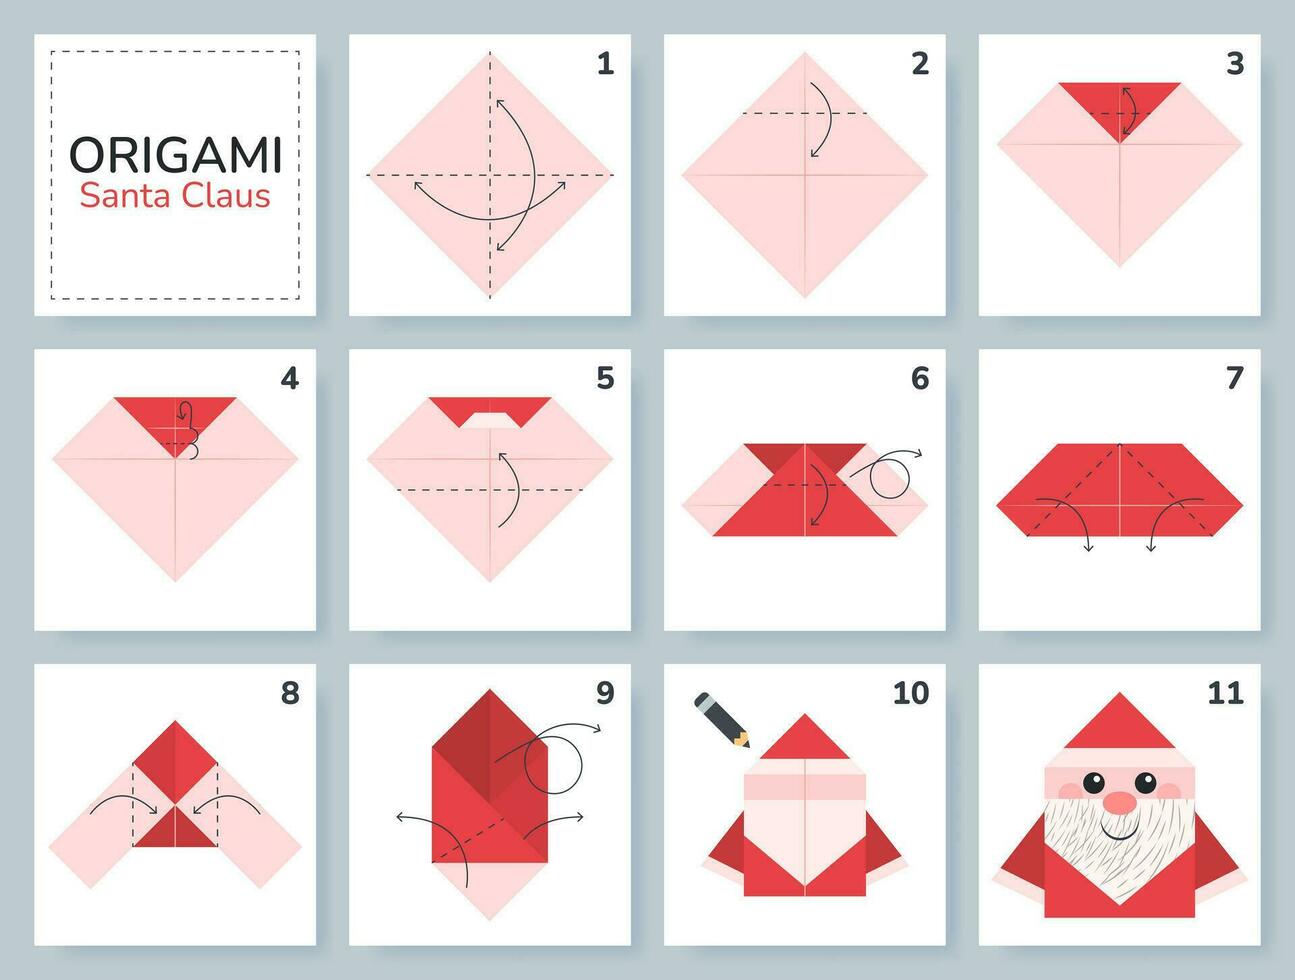 Santa Claus origami scheme tutorial moving model. Origami for kids. Step by step how to make a cute origami Santa Claus. Vector illustration.